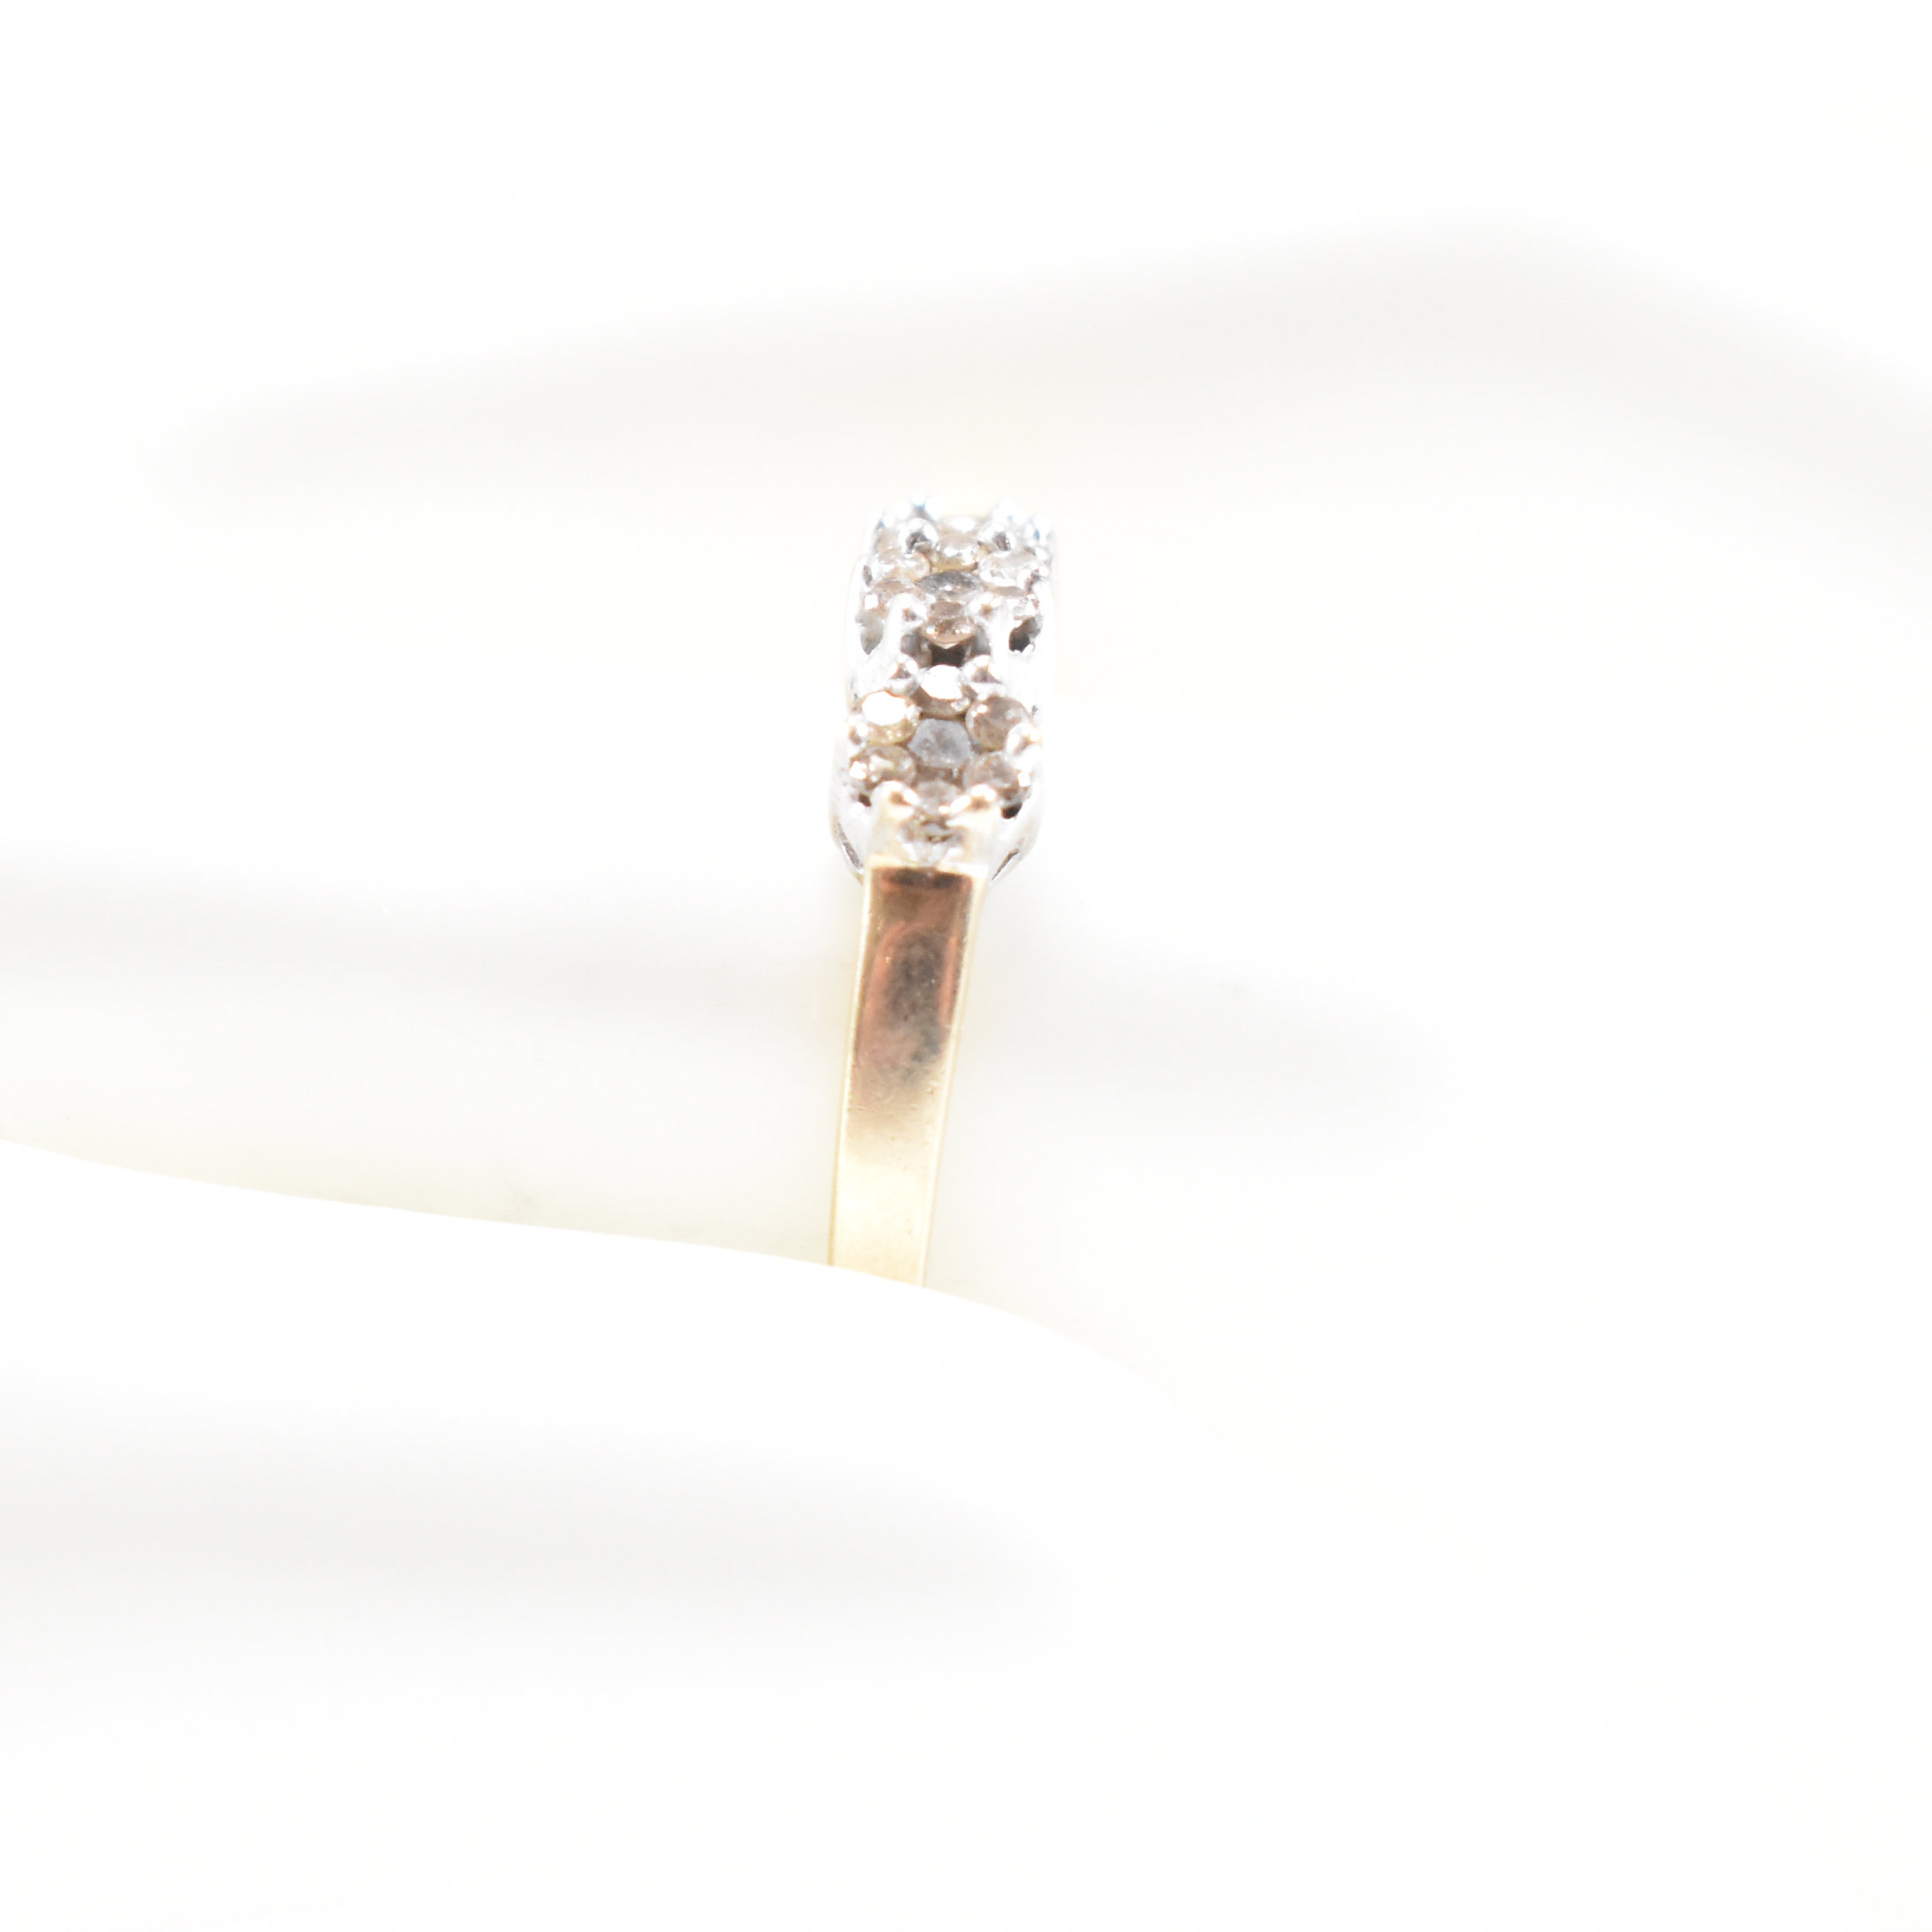 HALLMARKED 9CT GOLD & DIAMOND CLUSTER RING - Image 8 of 8